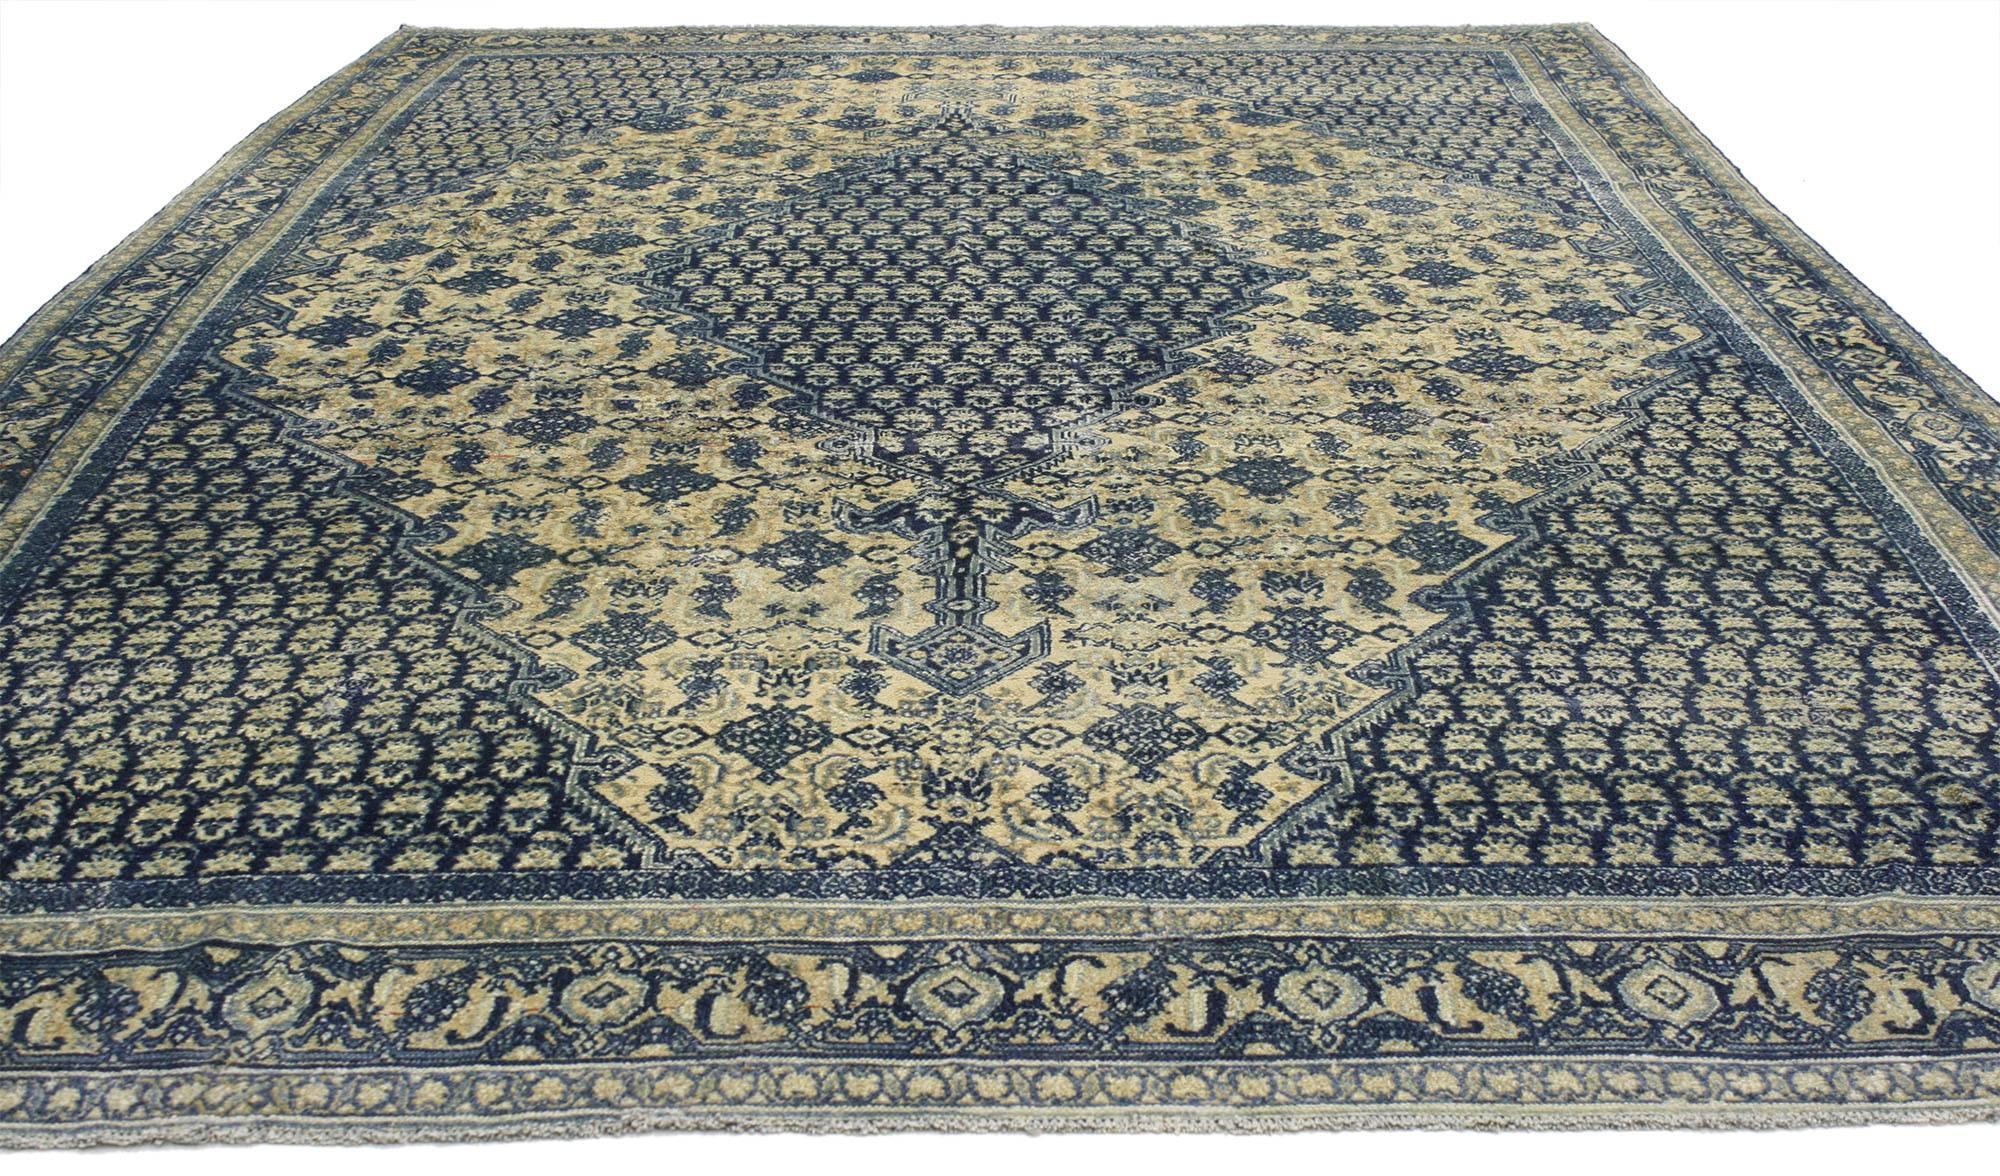 52260 antique Persian Malayer rug with French Country Style. Embodying refined relaxation with an artful balance between warm and inviting, this hand knotted wool antique Persian Malayer rug features features a French Country style. Recalling the